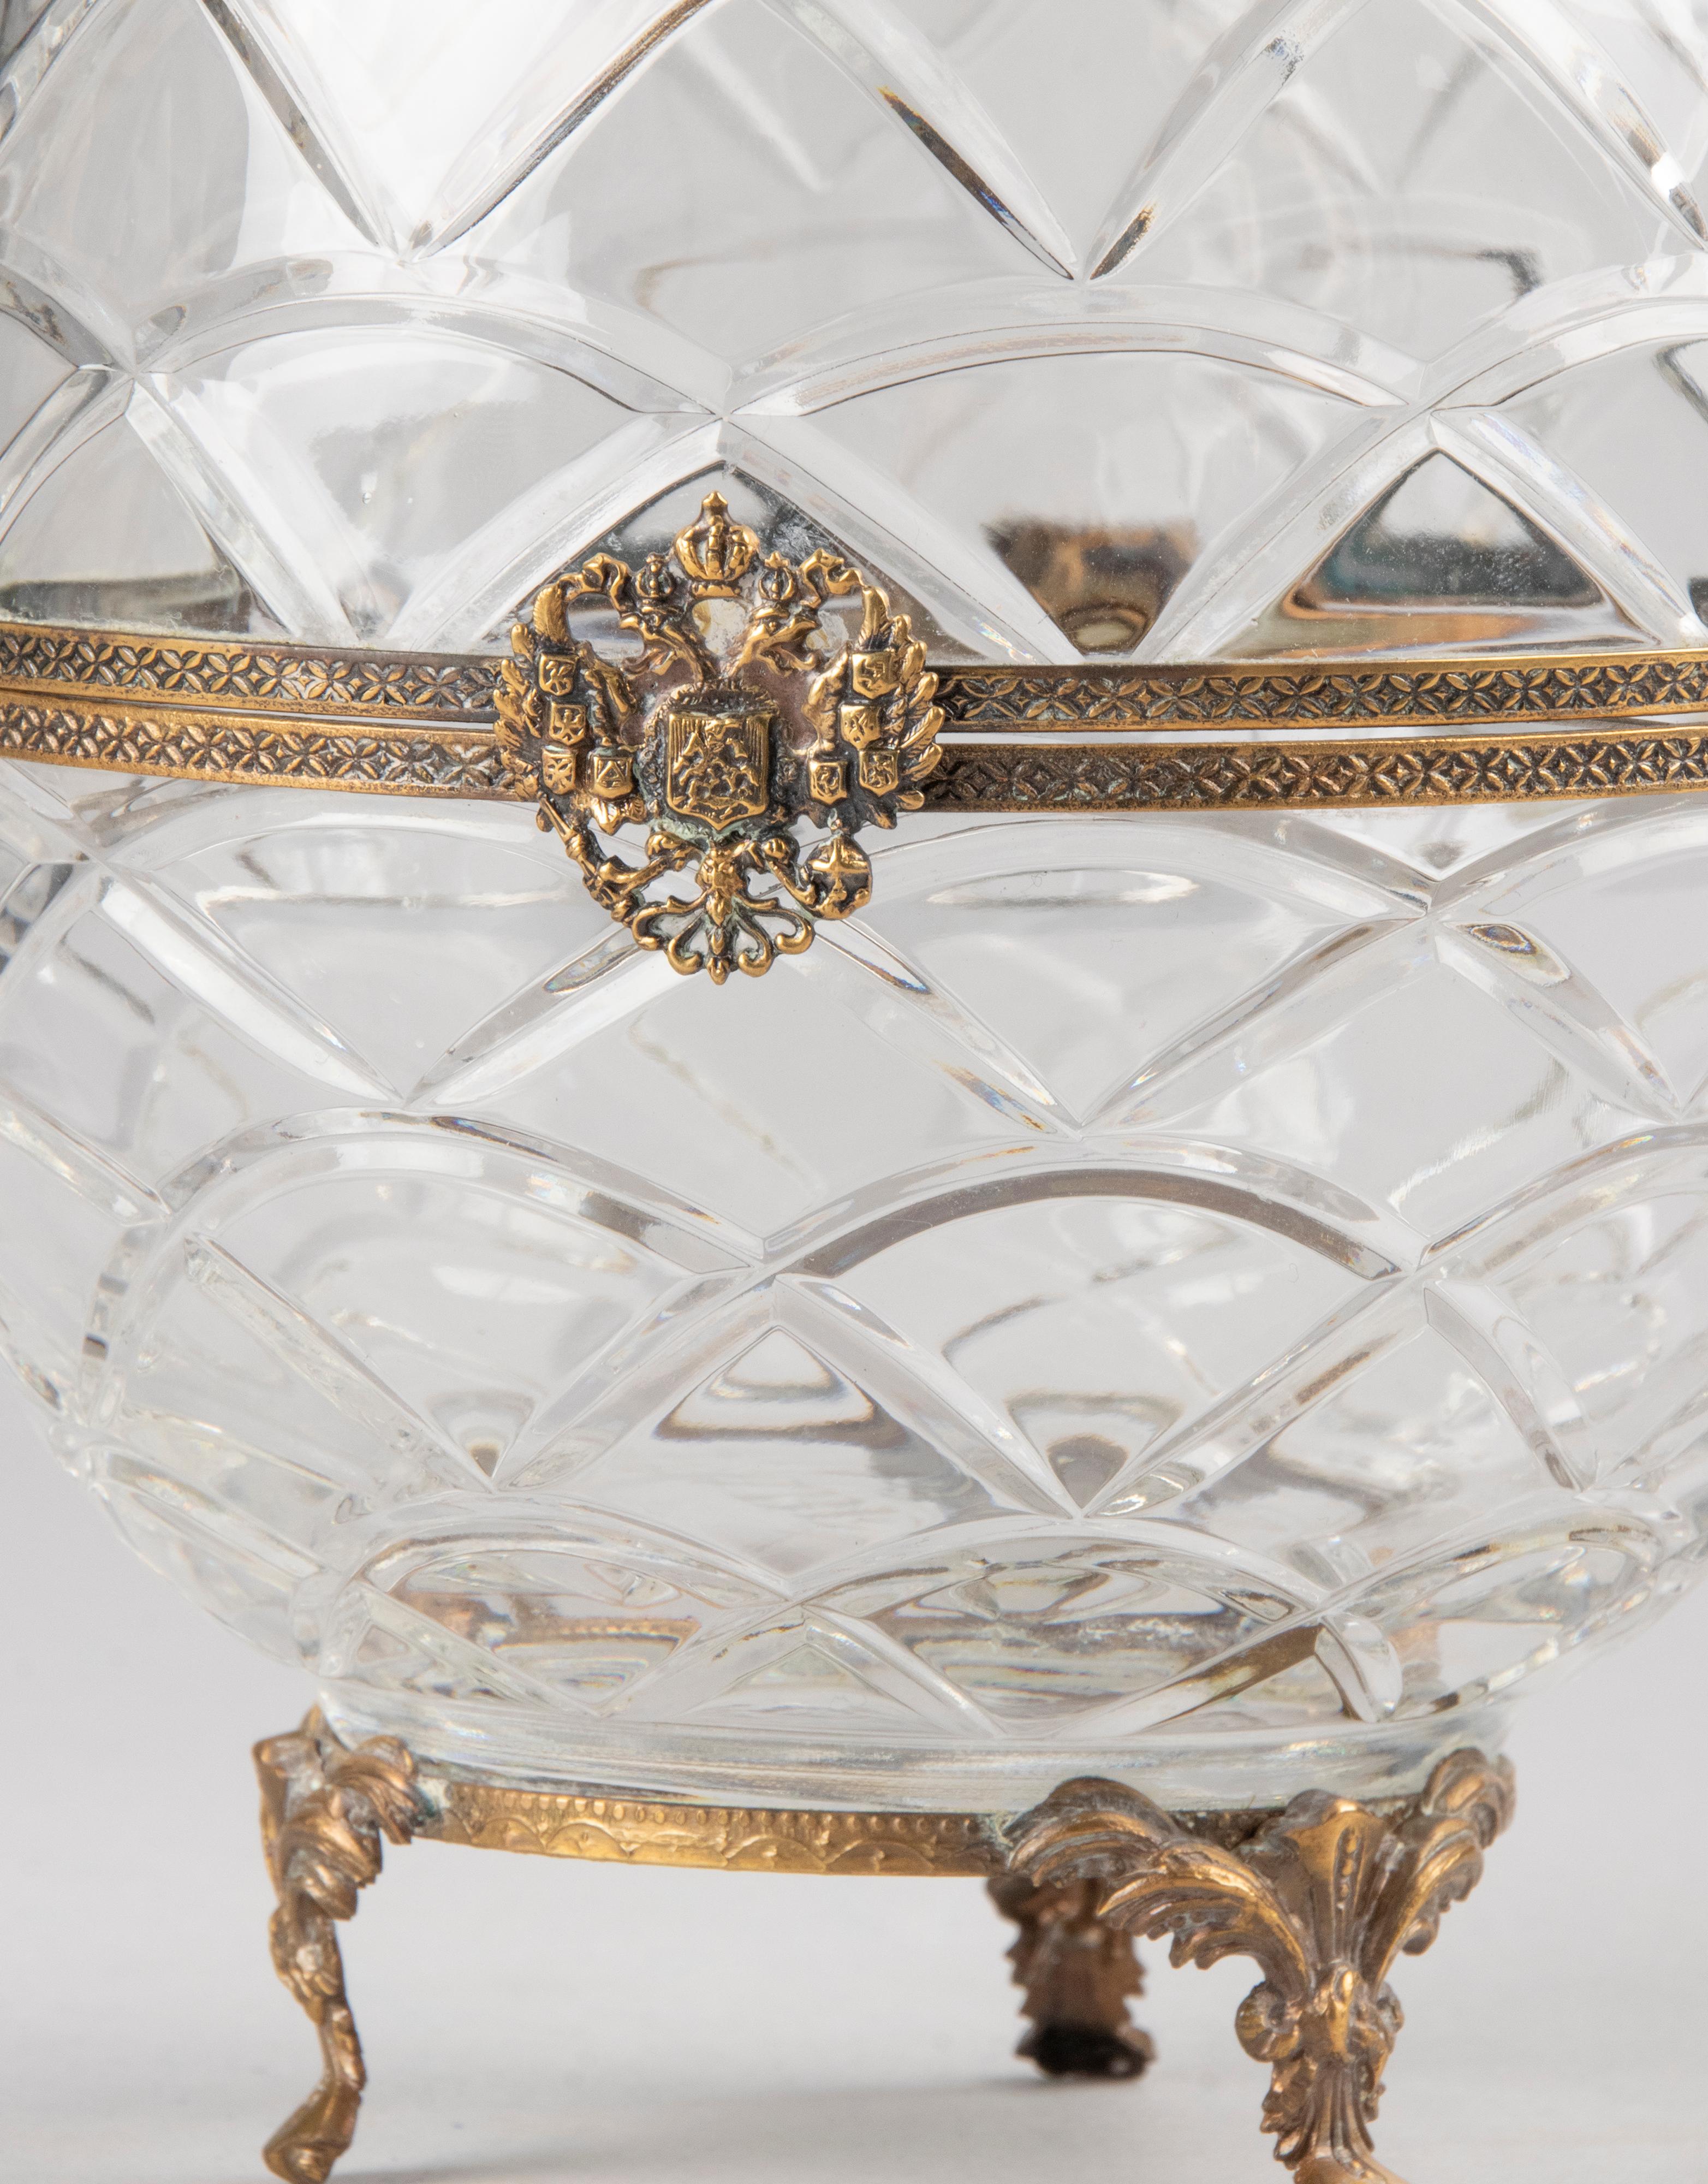 Hand-Crafted Mid-Century Modern Crystal Egg for Caviar and Vodka Made by Fabergé